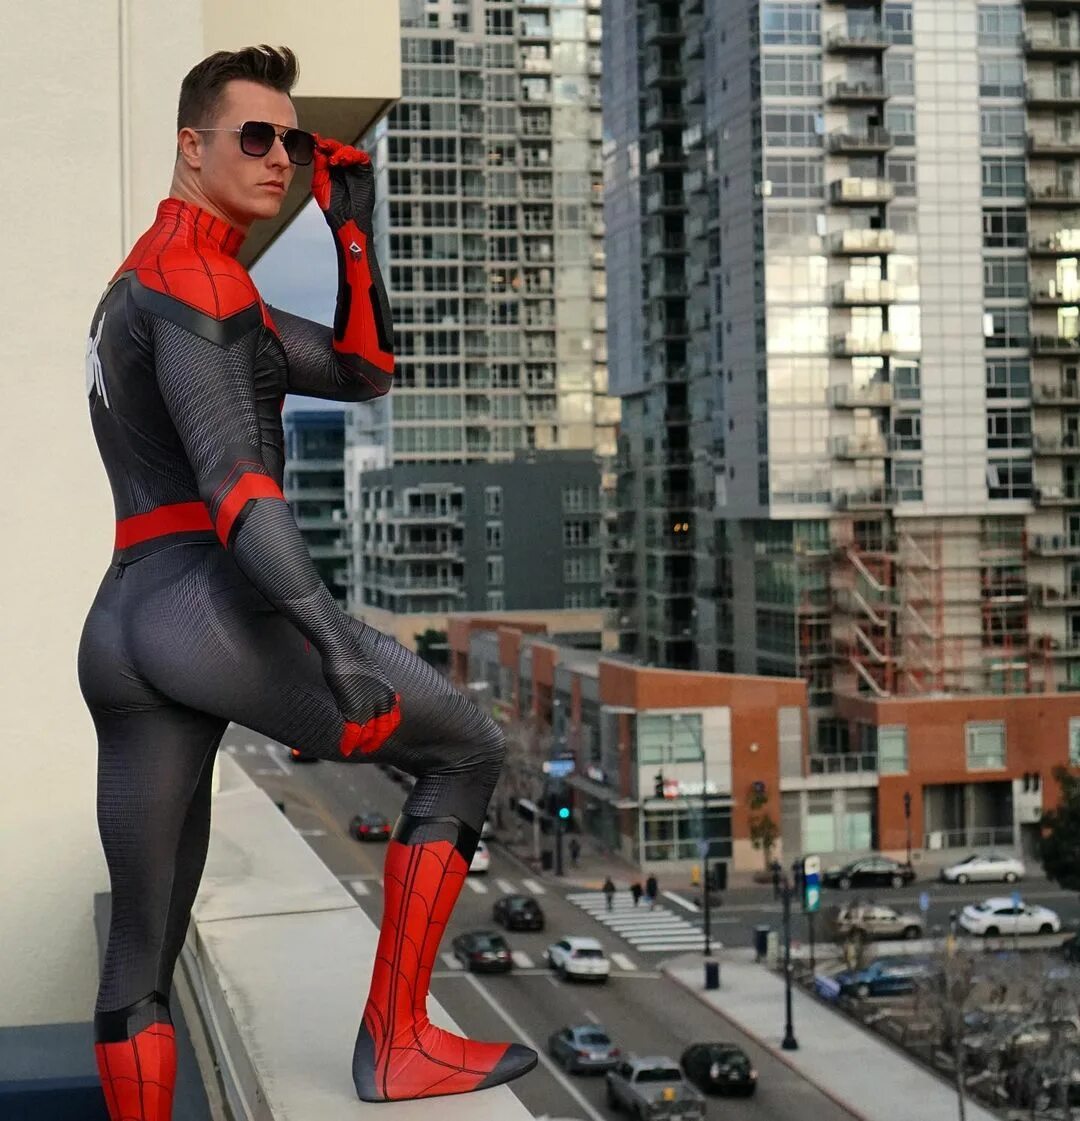 Onlyfans caleb weeks onlyfans%20Caleb%20Weeks%20%40ssspidermannreallife Images